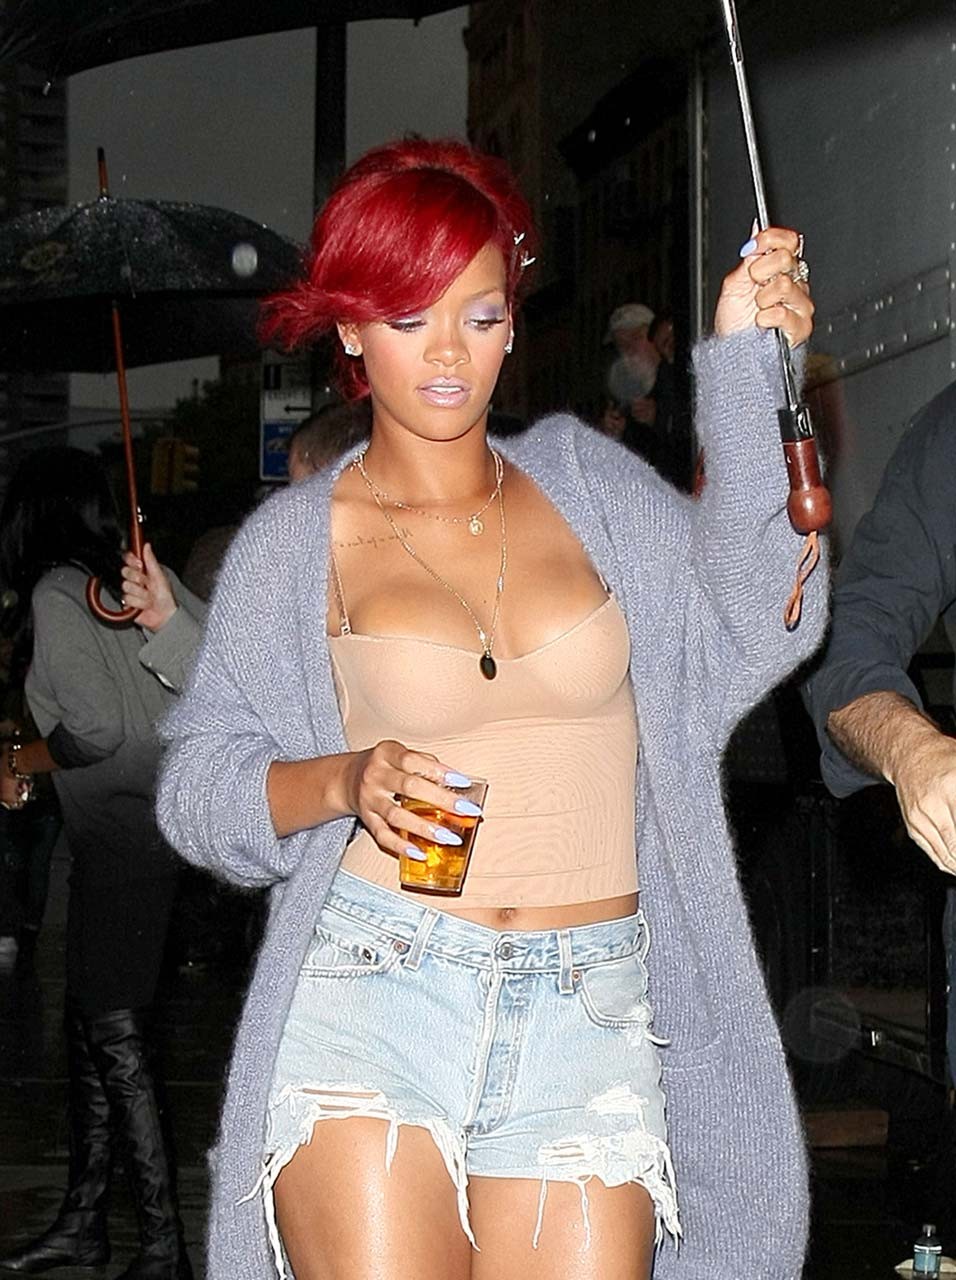 Rihanna showing big cleavage and sexy in white socks paparazzi pictures #75308997